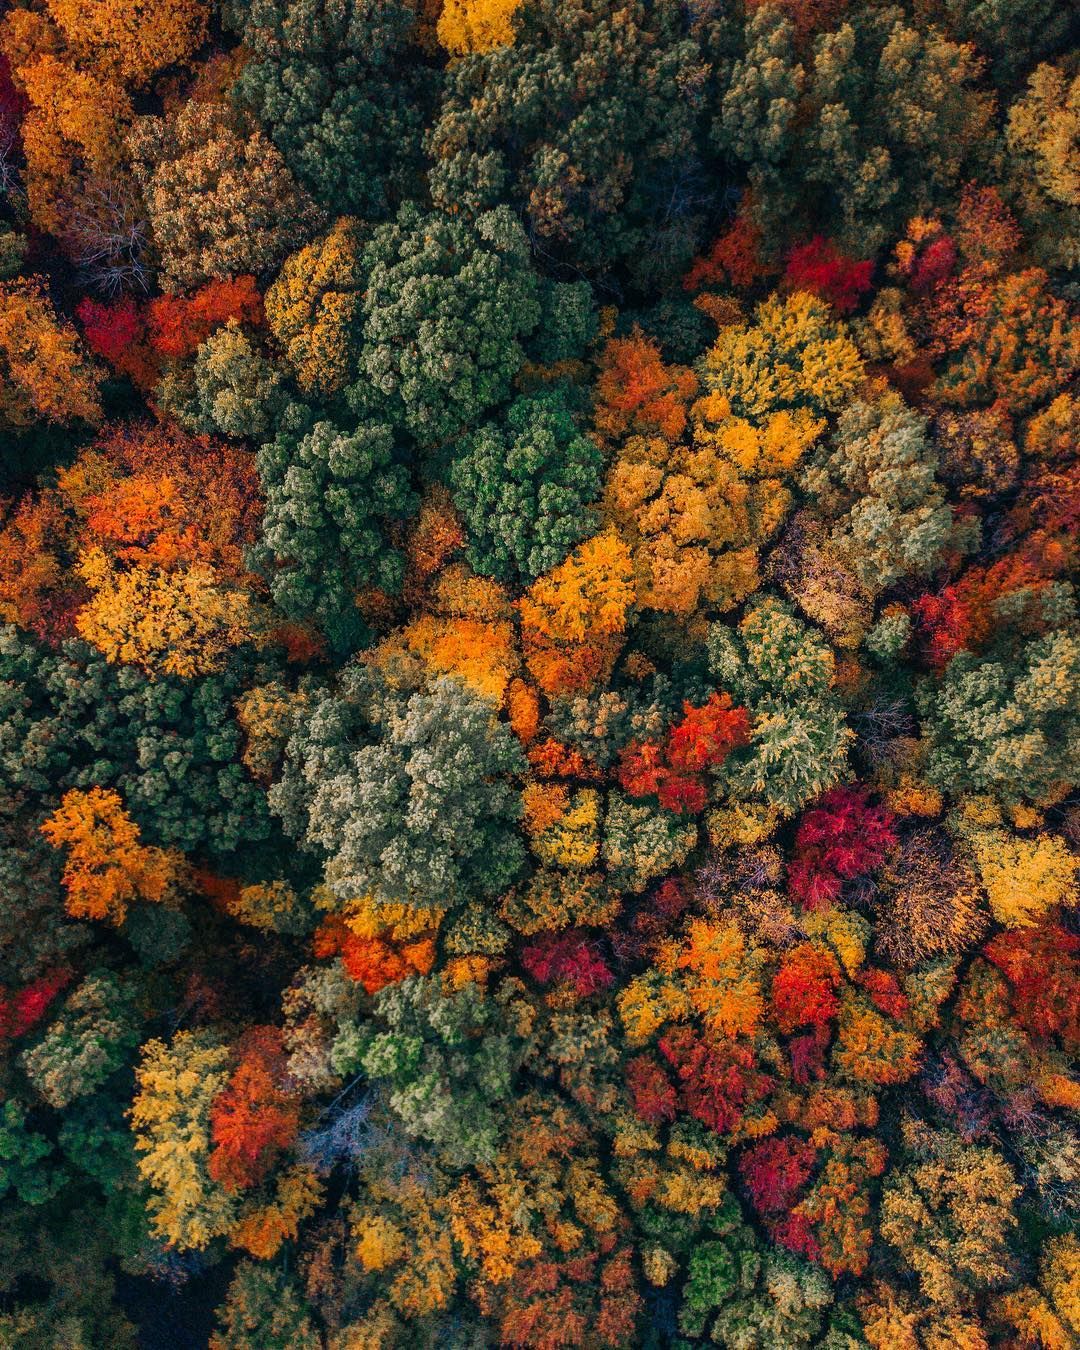 General 1080x1350 nature fall leaves trees drone photo aerial view colorful forest